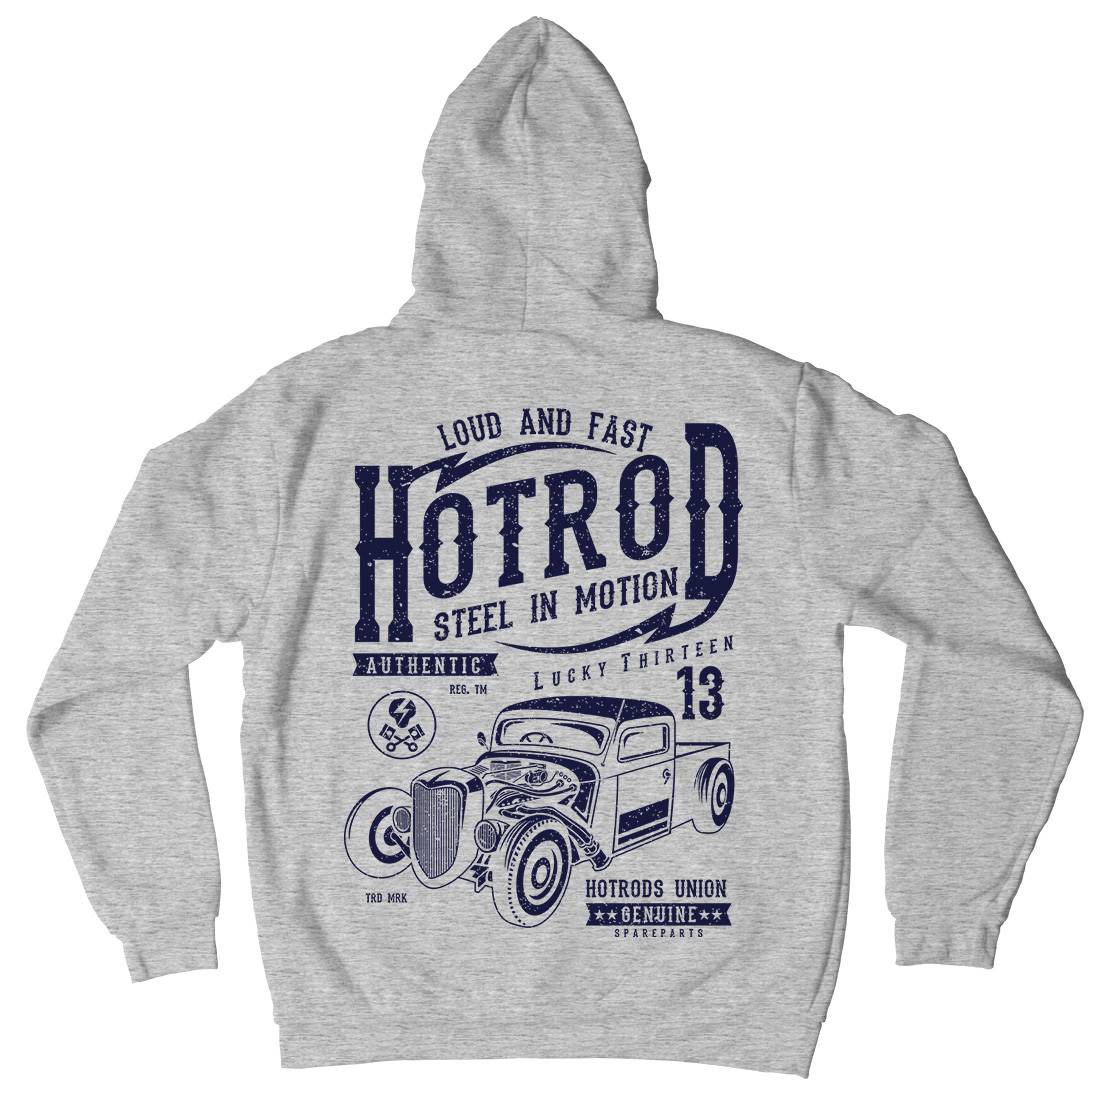 Steel In Motion Mens Hoodie With Pocket Cars A767